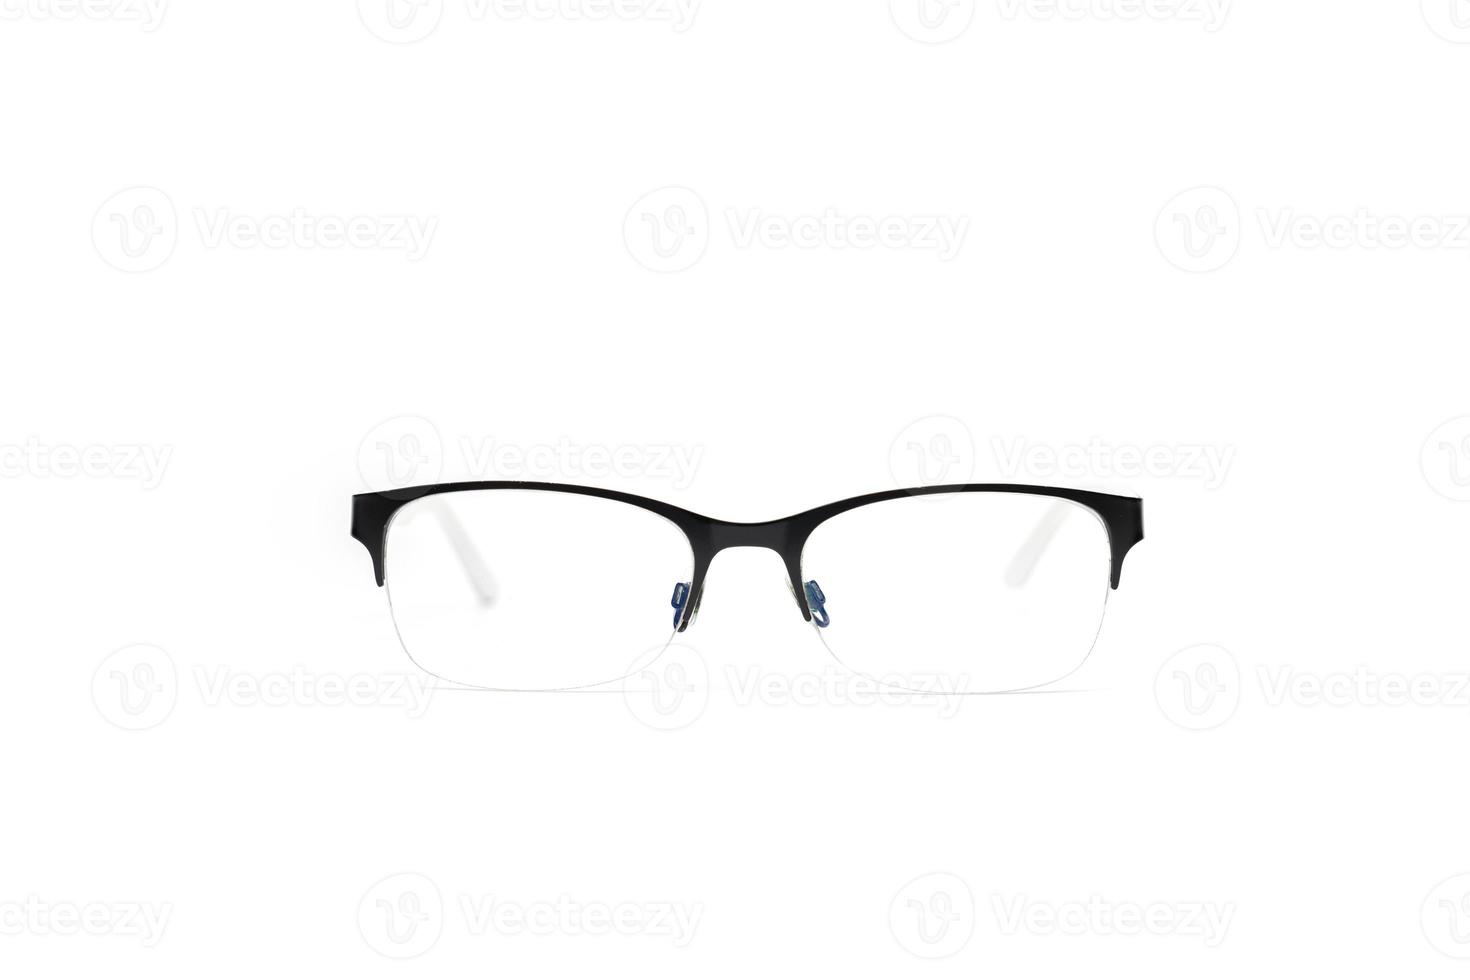 Simple glasses bold black frame on the top of lens. It's isolated from background and  lays on the white background in studio light. photo